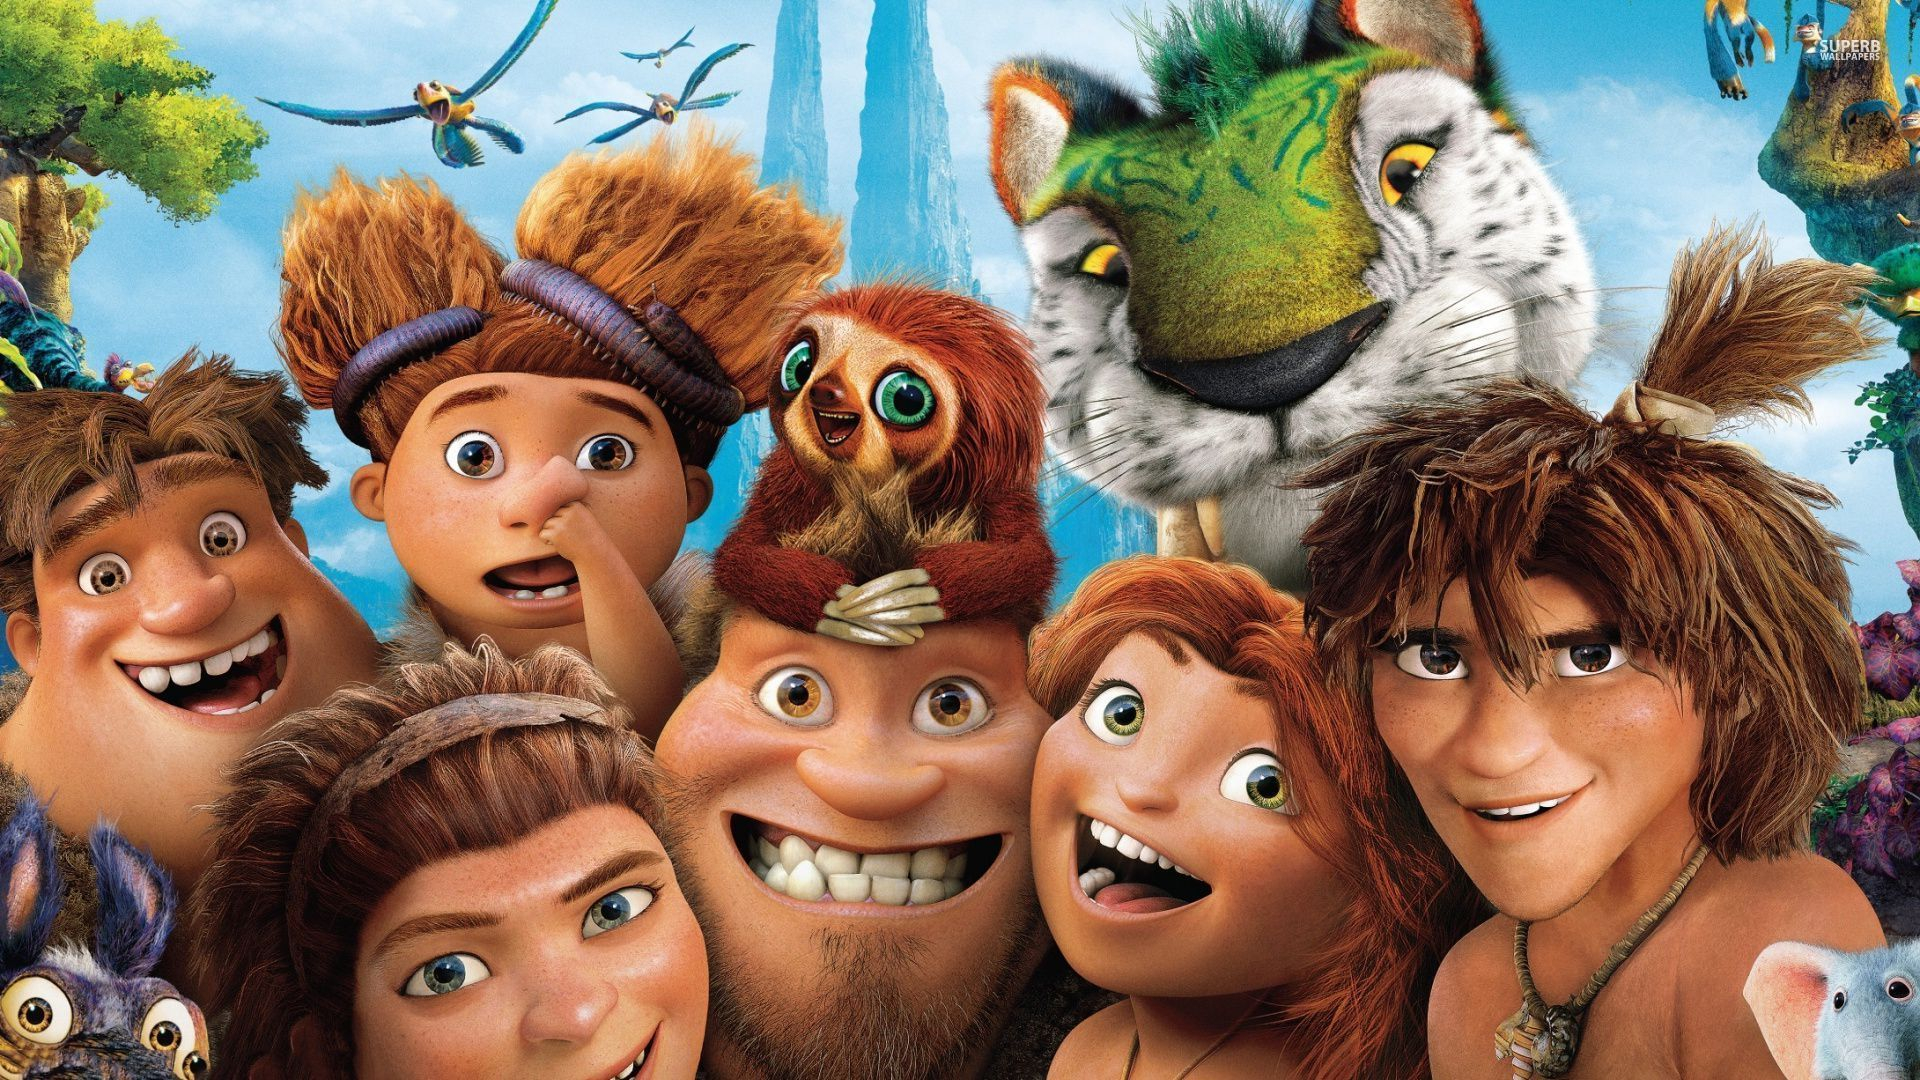 1920x1080 The Croods: A New Age Wallpapers